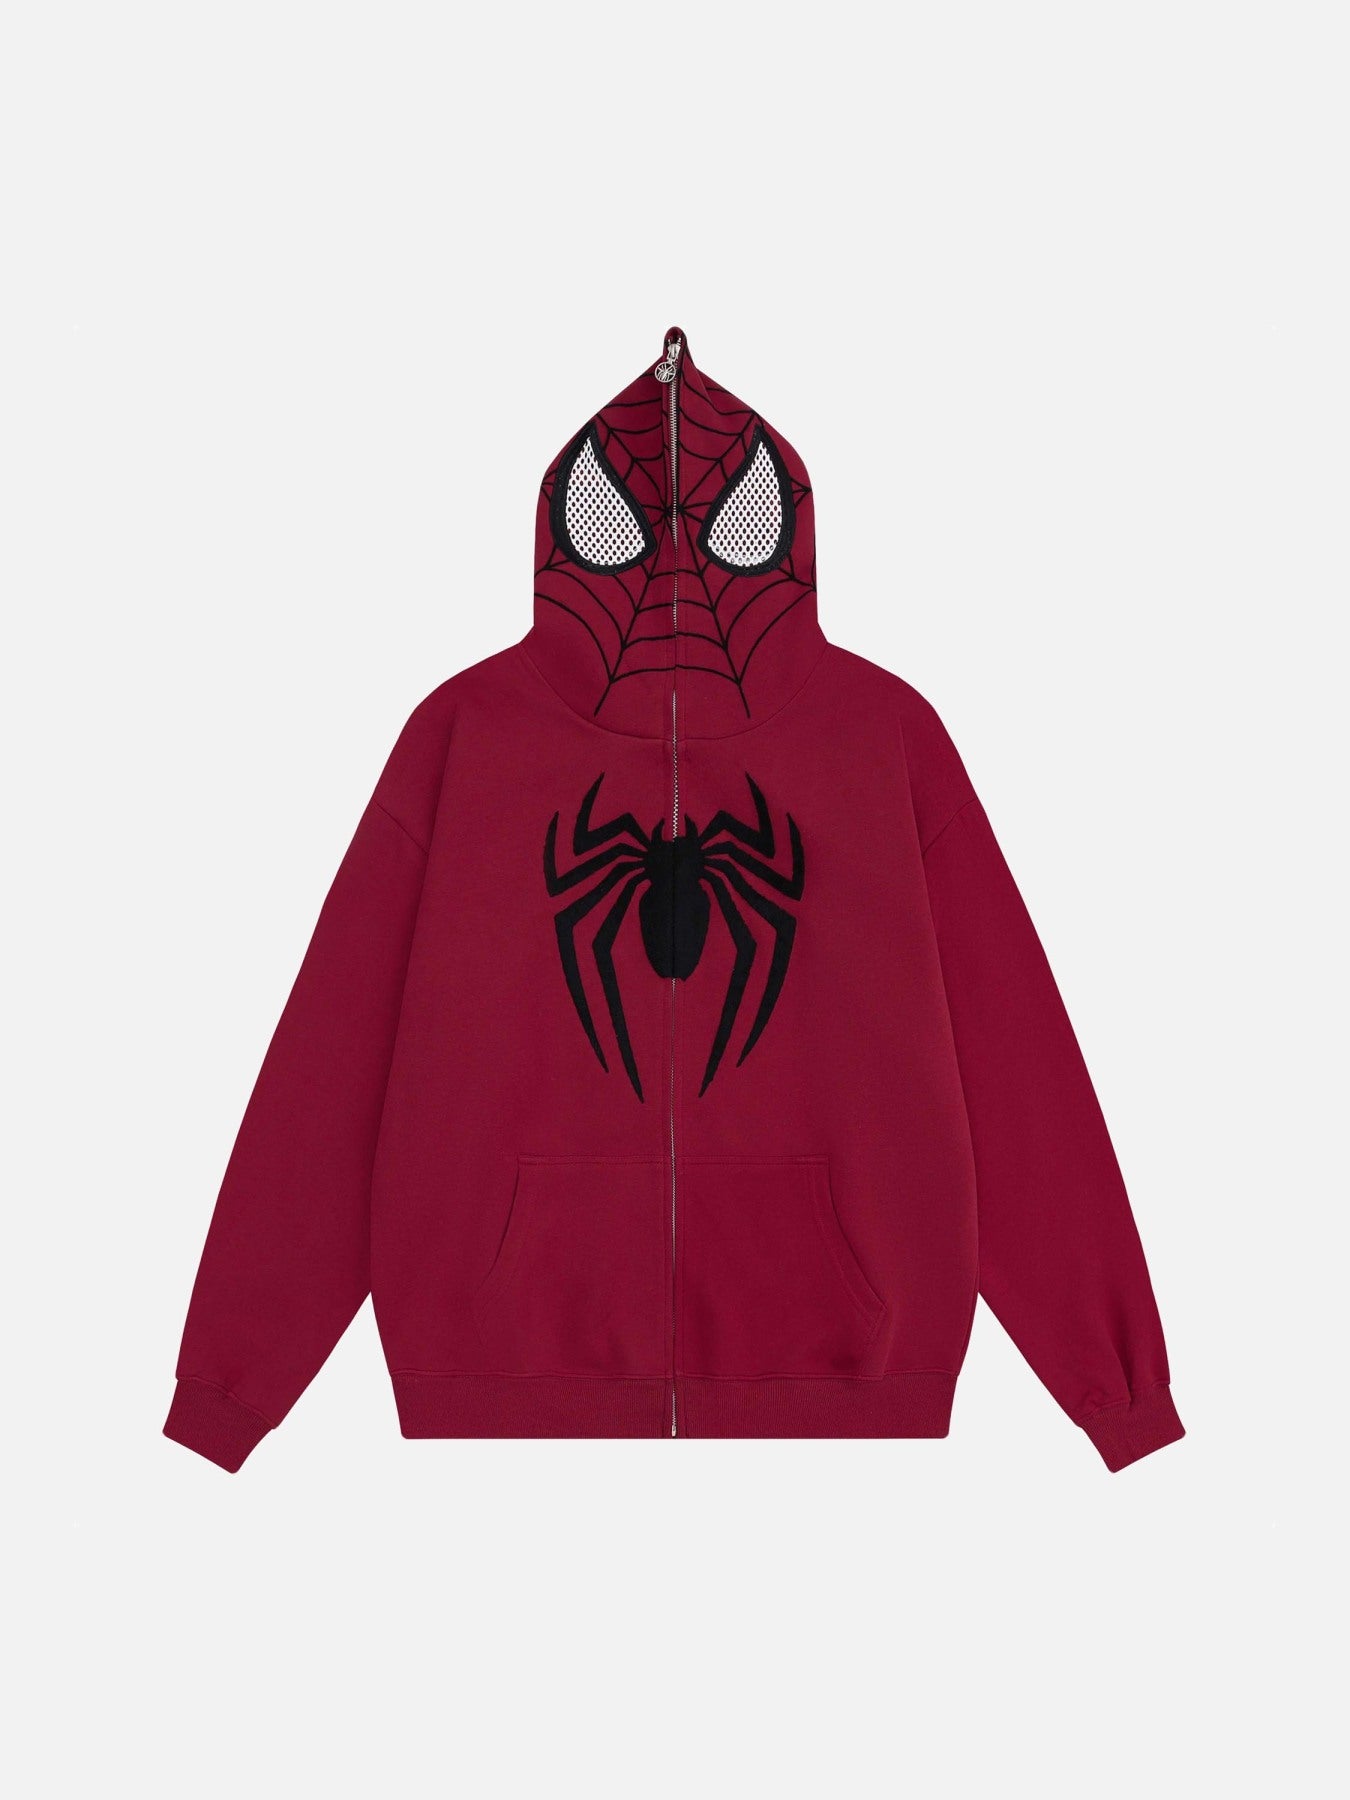 The Supermade Spider Web Embroidery Eye Viewable Hoodie